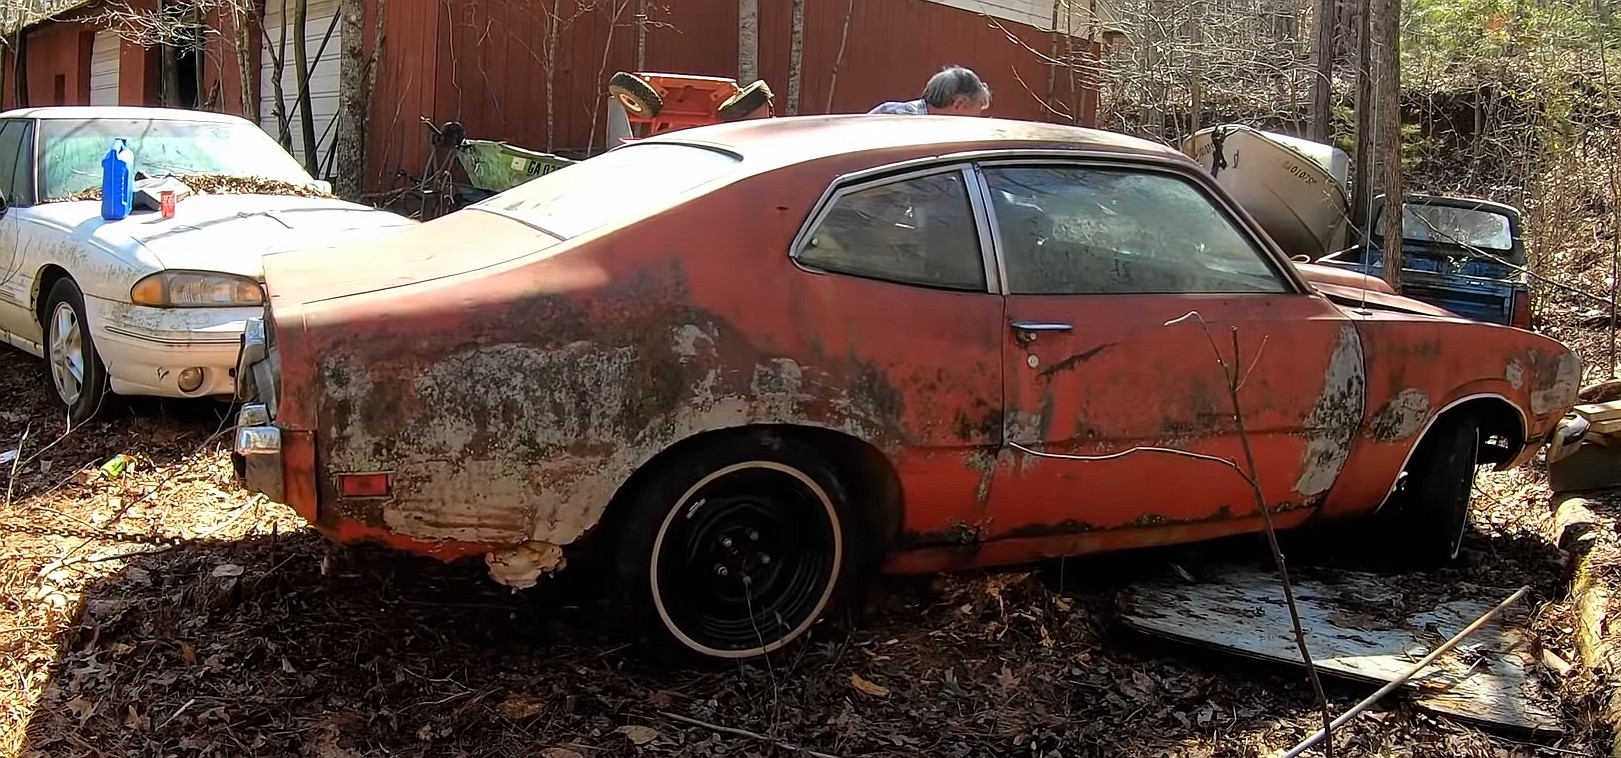 1973 mercury comet gt takes first drive in 35 years almost turns into a fireball 2